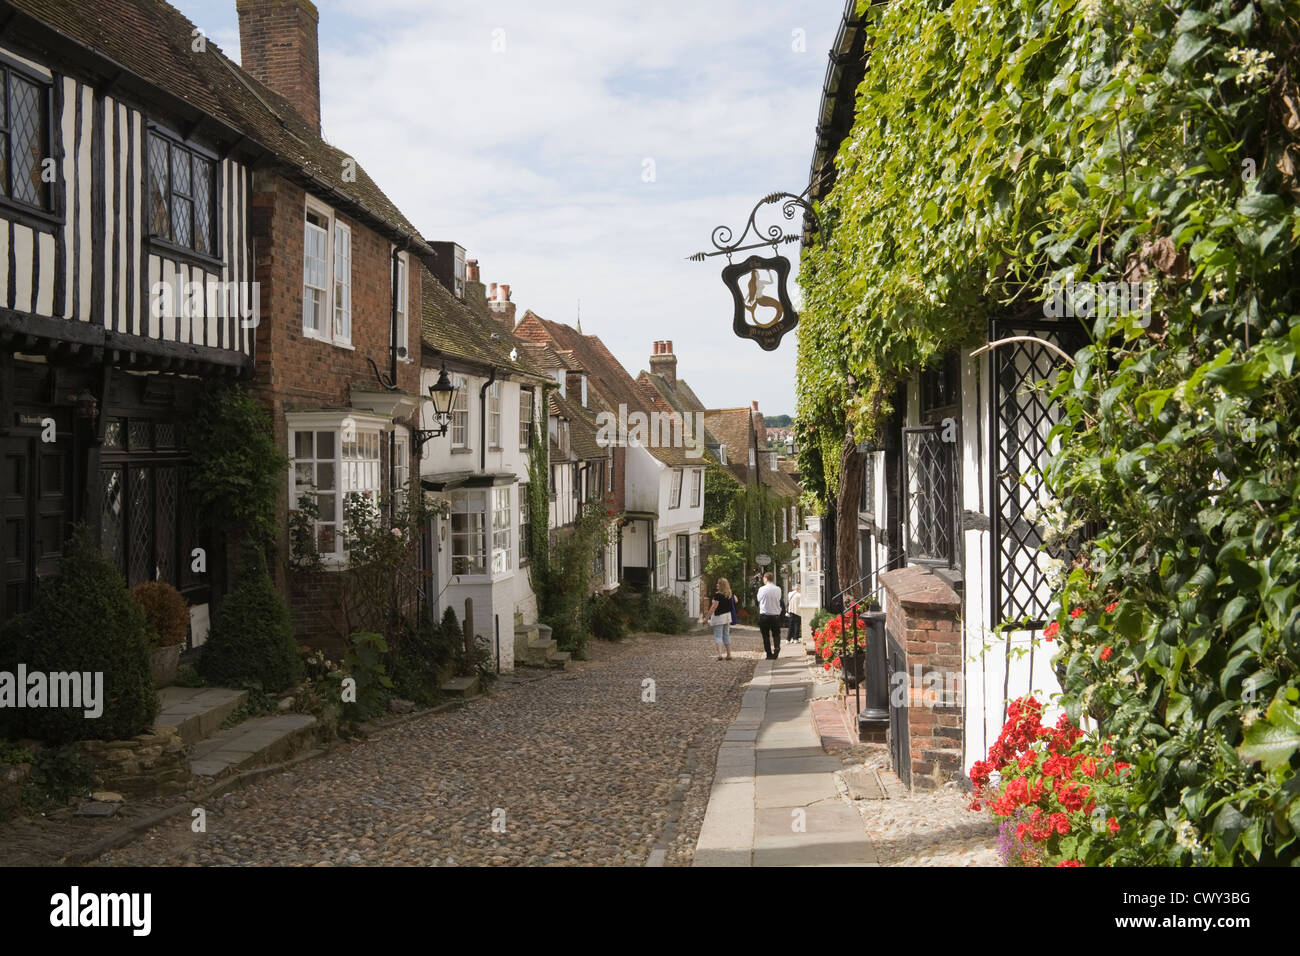 Rye East Sussex England UK Visitors admiring period buildings in medieval cobbled Mermaid Street dating to 16thc Stock Photo